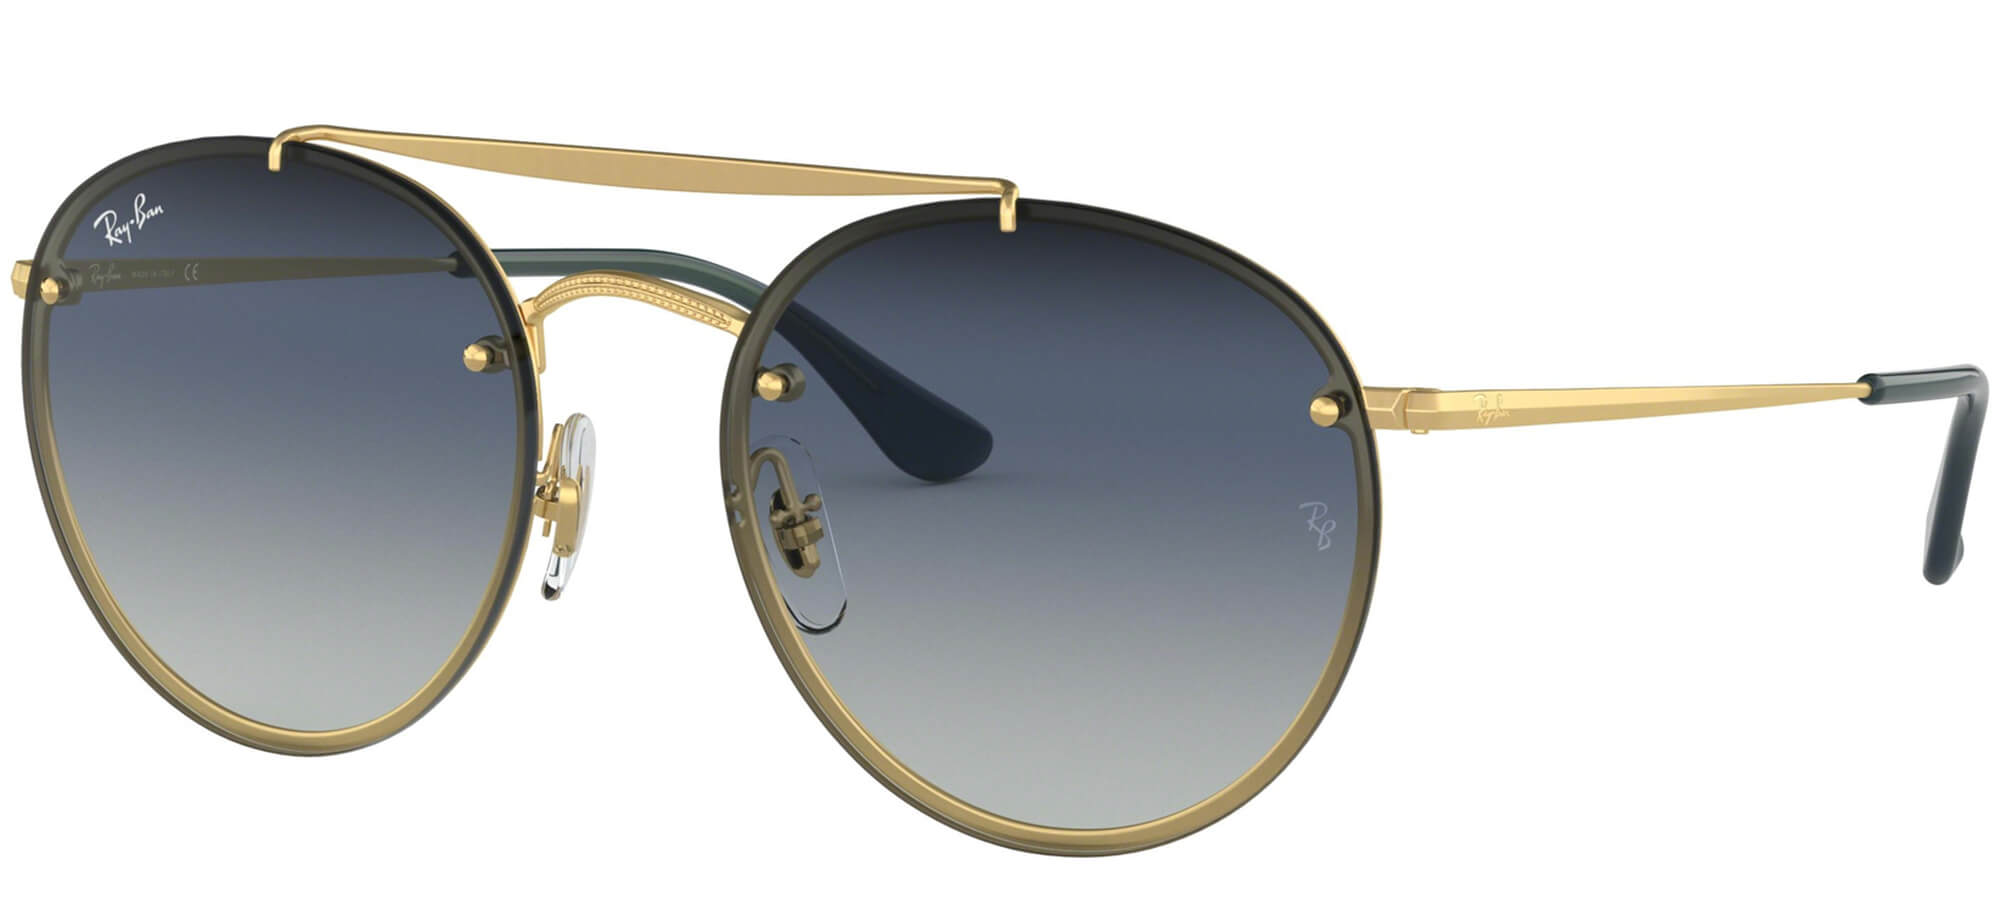 Ray-BanBLAZE RB 3614NGold/grey Blue Shaded (9140/0S)